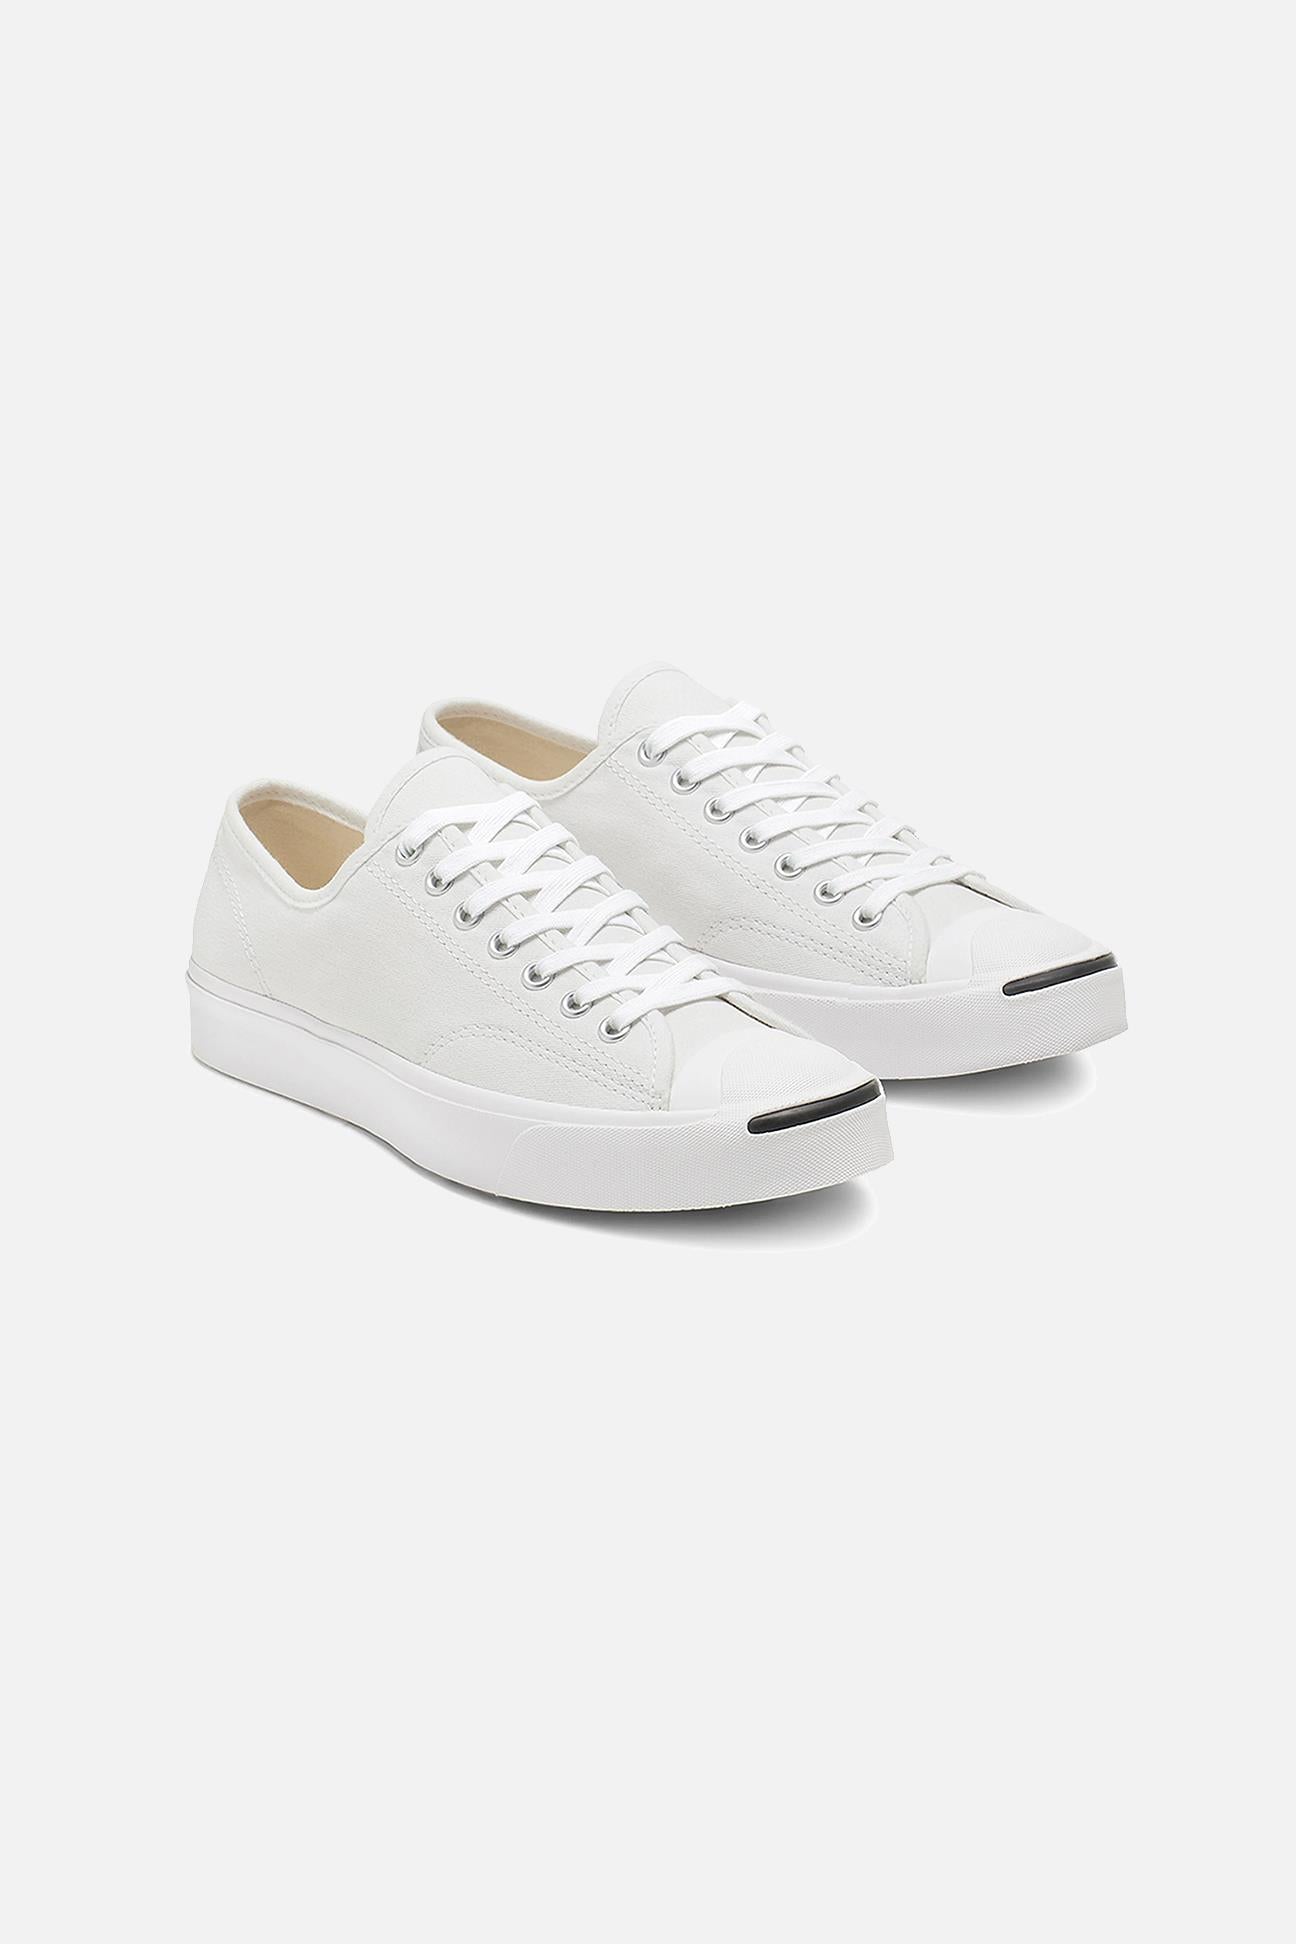  JACK PURCELL CANVAS